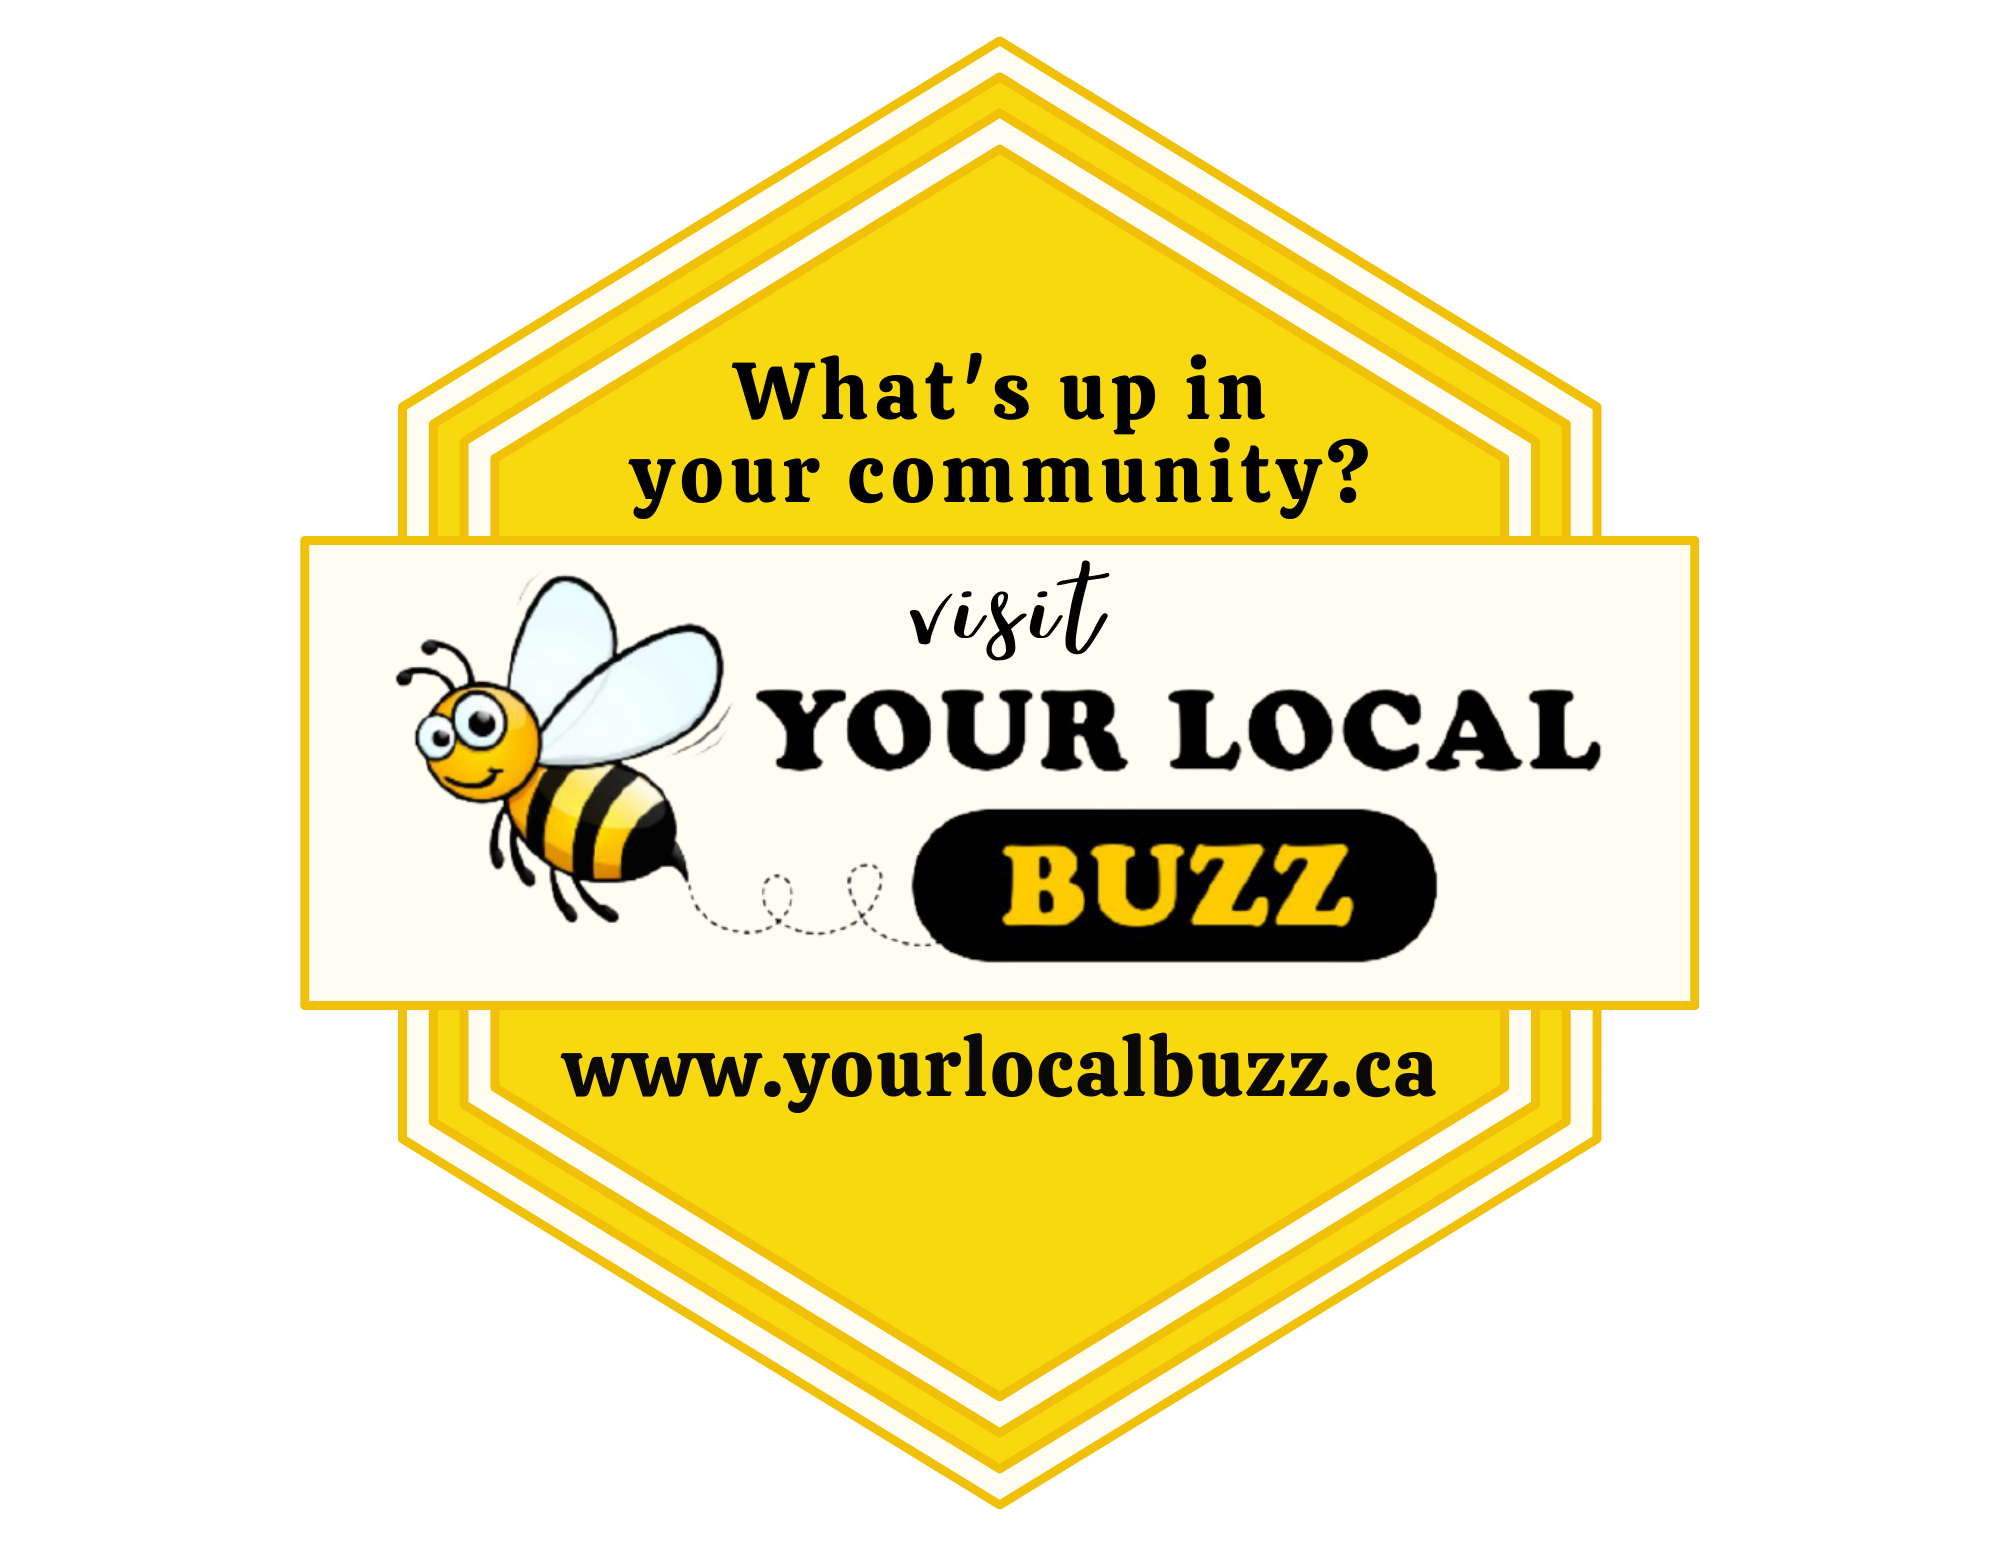 Share YOUR BUZZ!